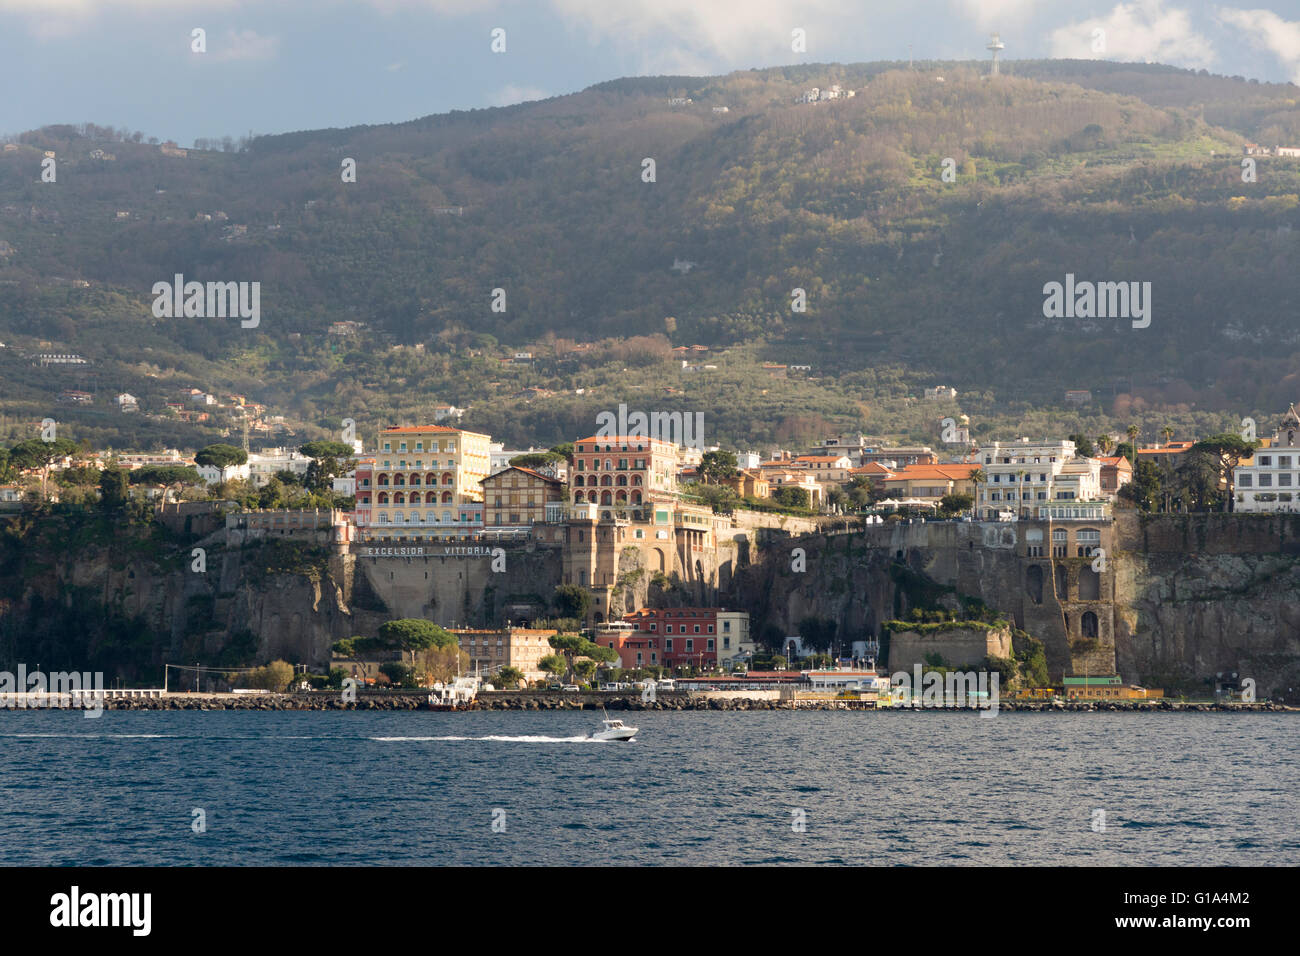 The Sorrento coastline, cliffs, clifftop hotels and buildings from the Gulf of Naples sea & the hills of the Sorrentine Peninsula behind. Italy Stock Photo